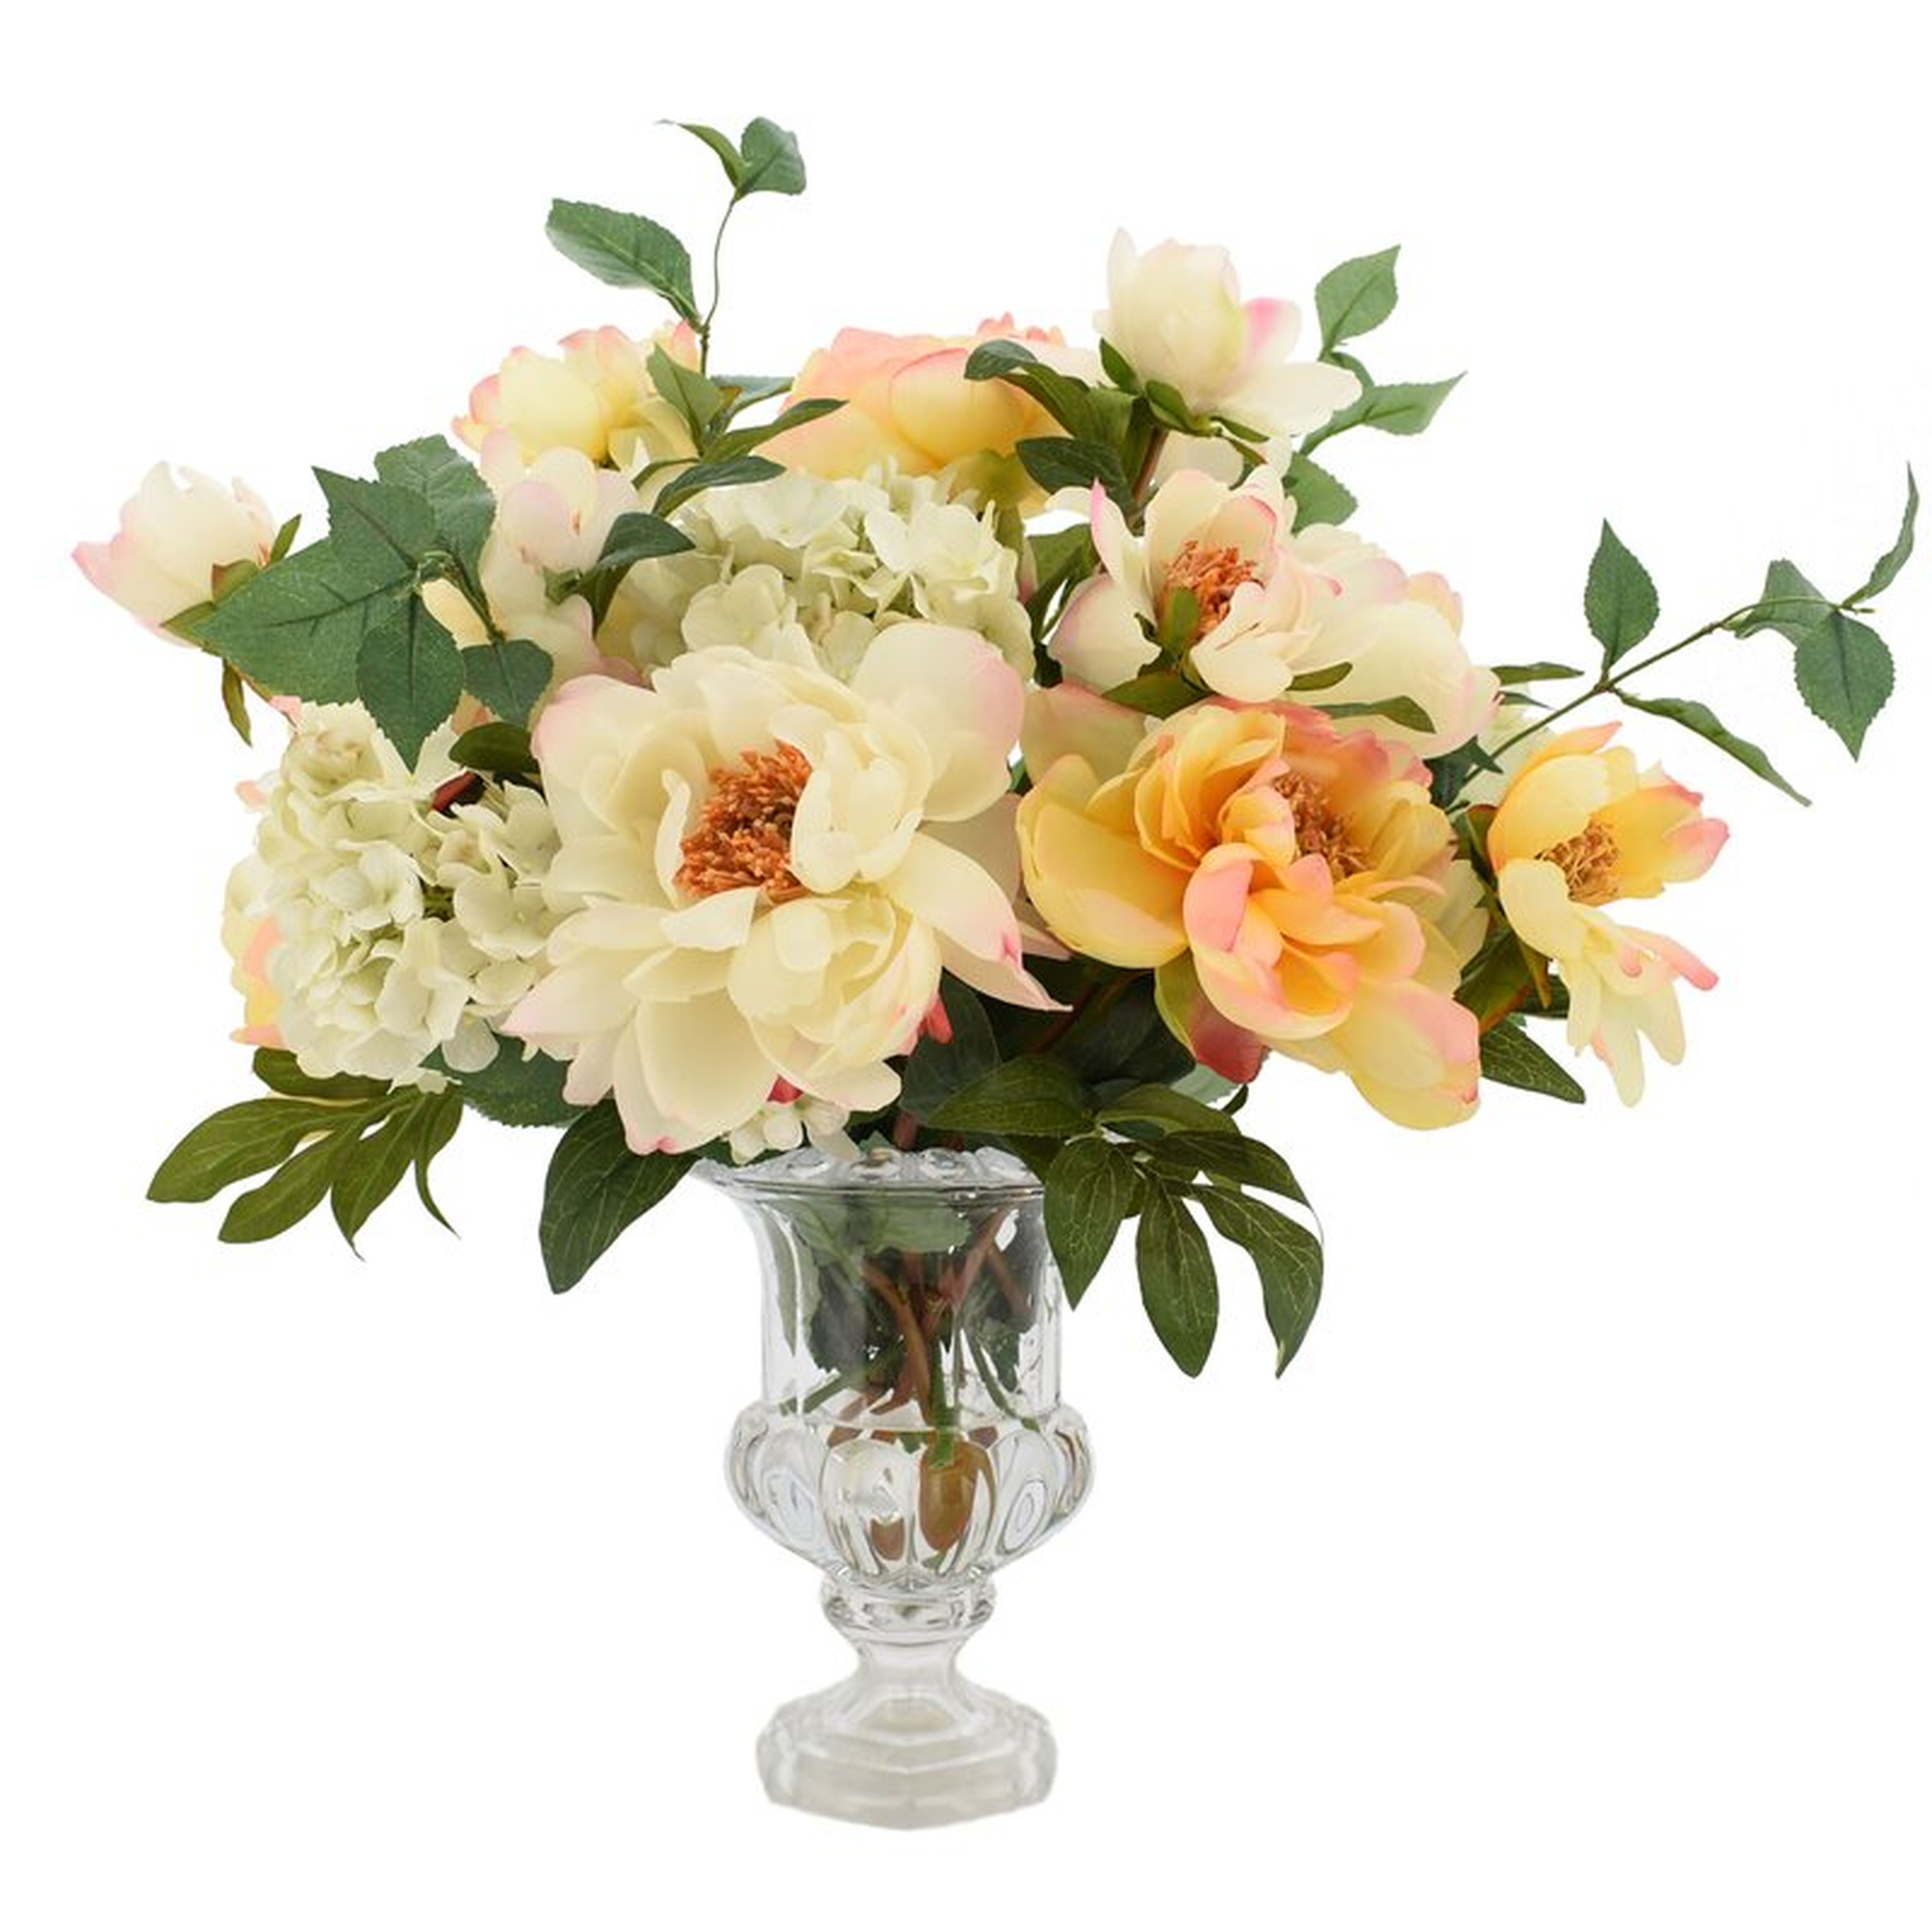 Mixed Peony And Hydrangea Bouquet In Pedestal Vase Flower Color: White - Perigold